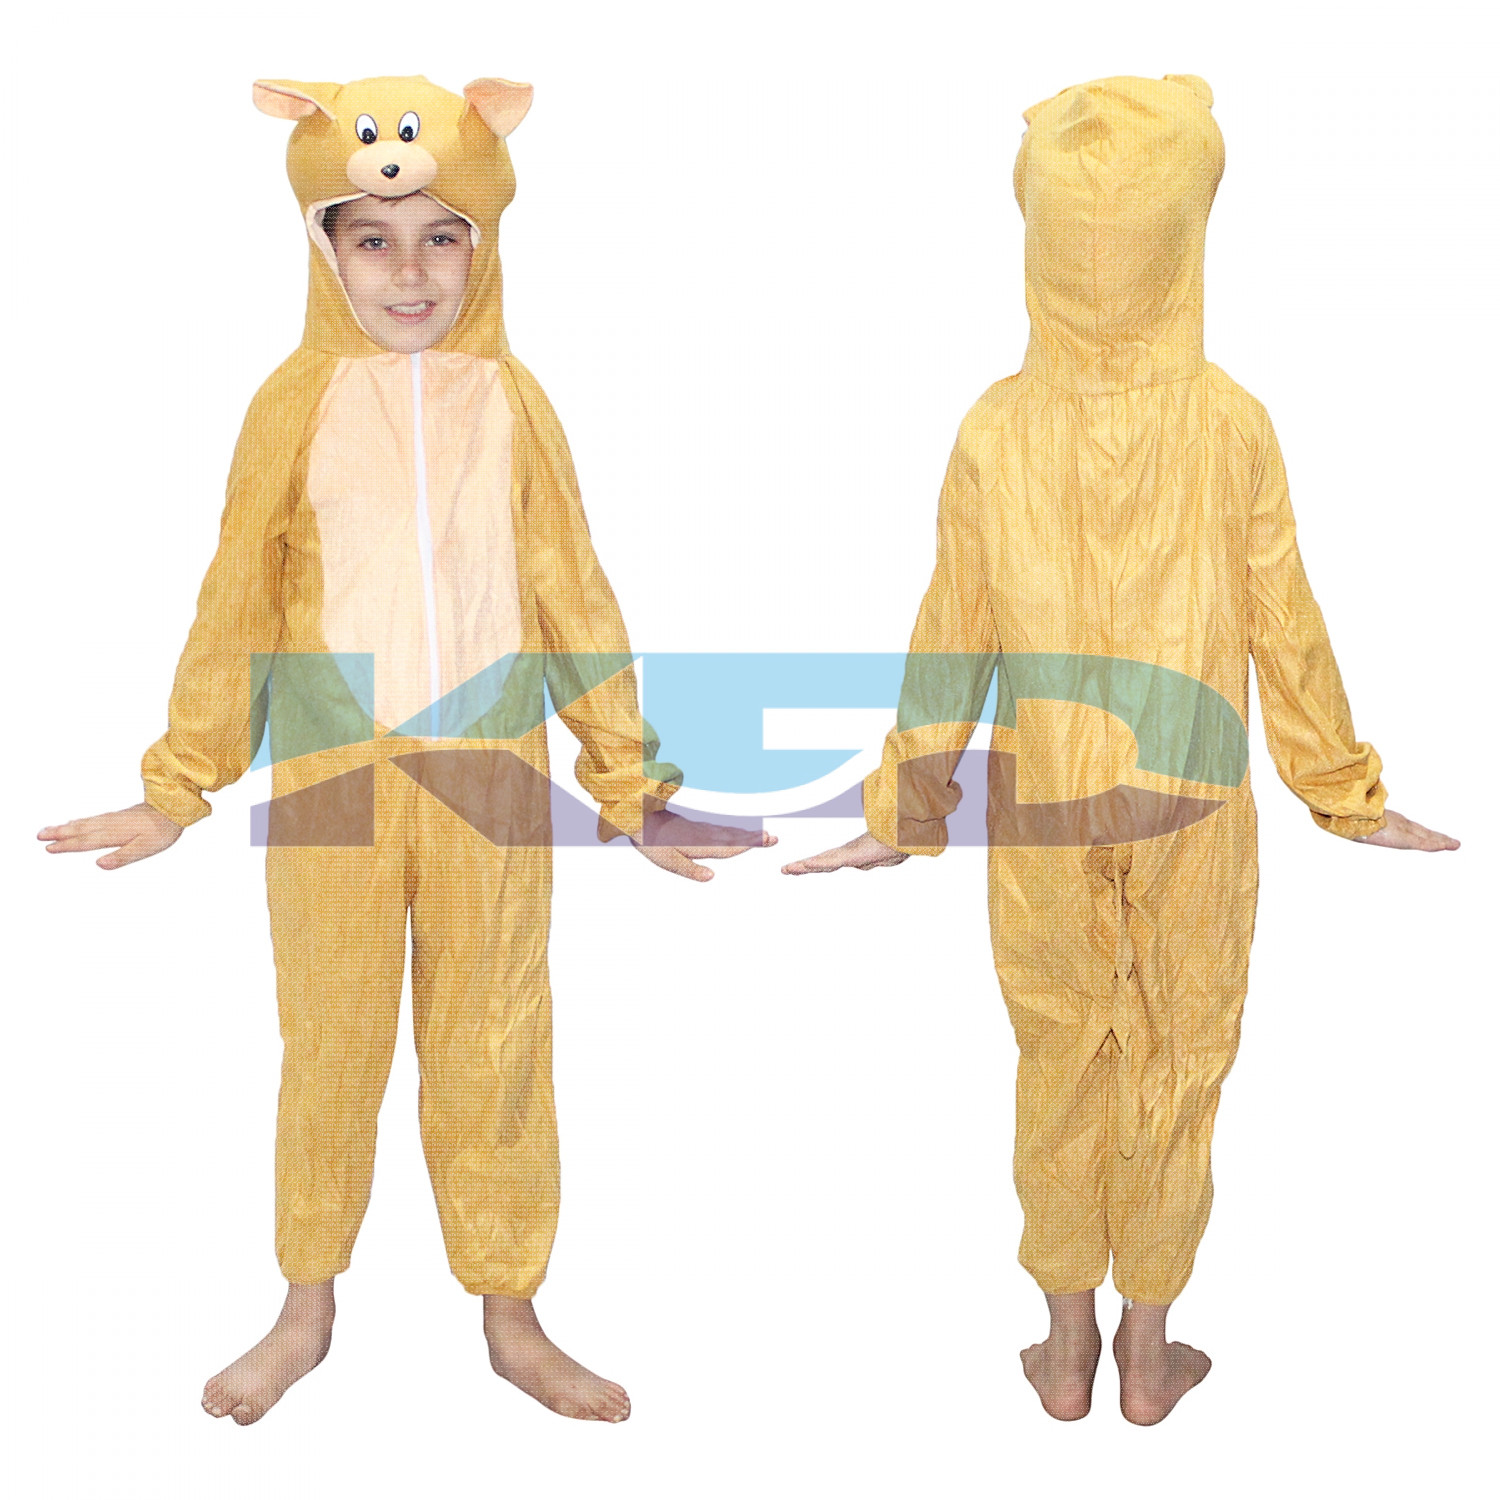 Jerry Fancy dress for kids,Diseny Cartoon Costume for Annual function/Theme Party/Stage Shows/Competition/Birthday Party Dress